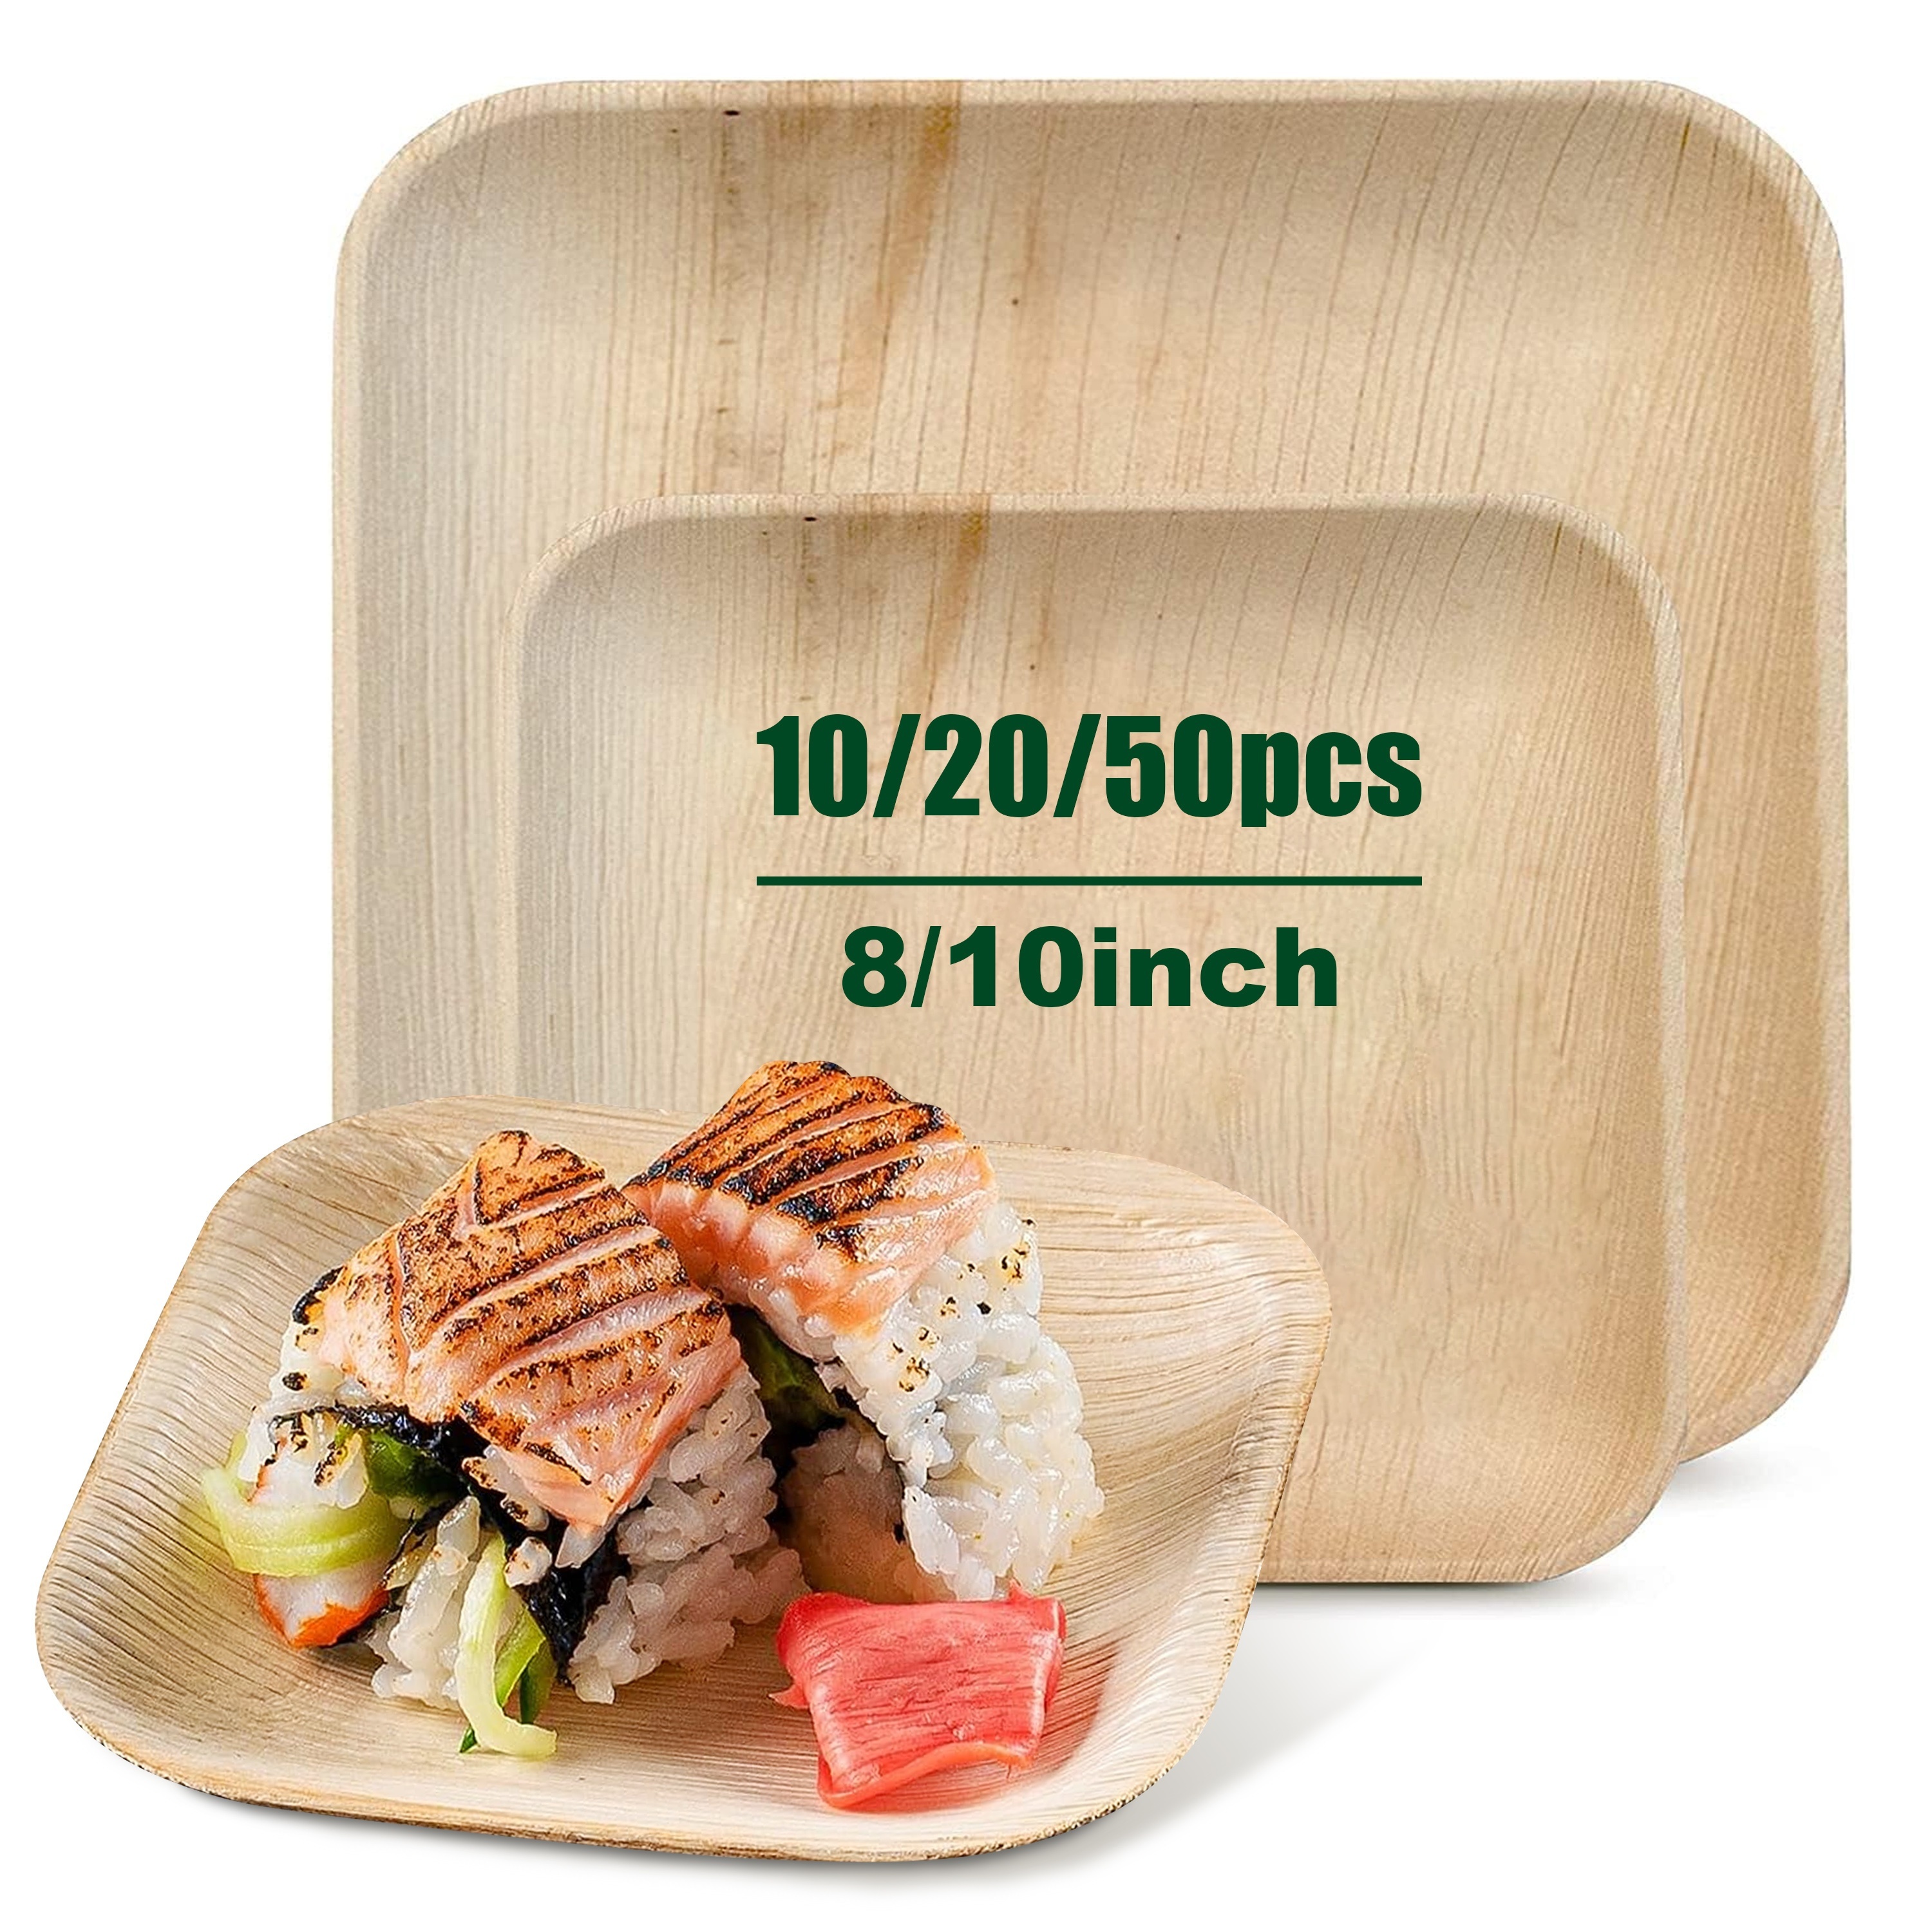 Simply Done Paper Plates, Heavy Duty, 10 Inch